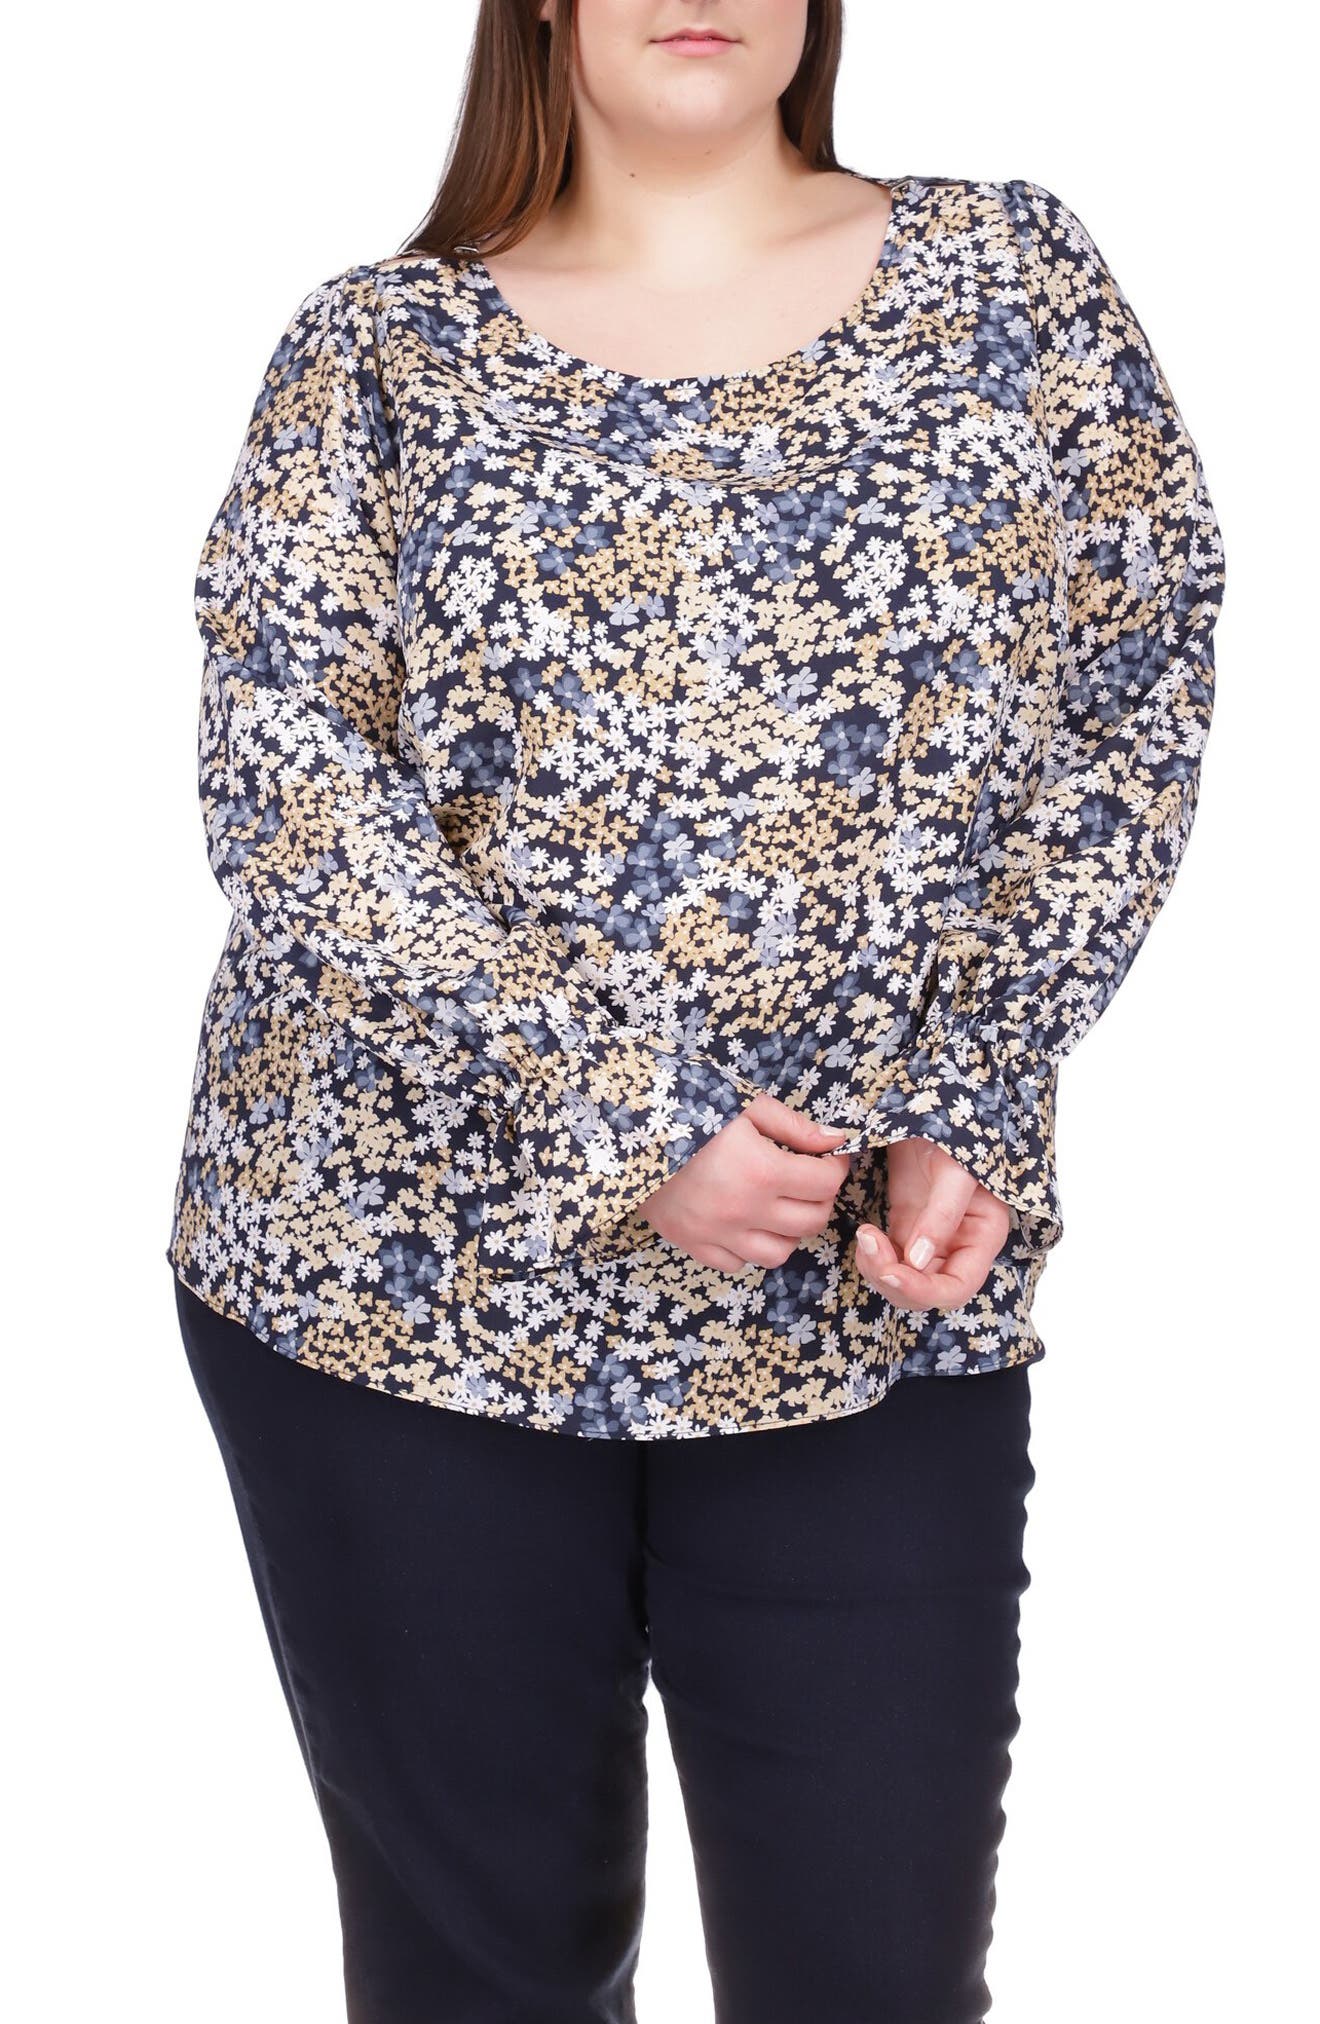 Michael Kors Floral Print Scoop Neck Top in Chambray